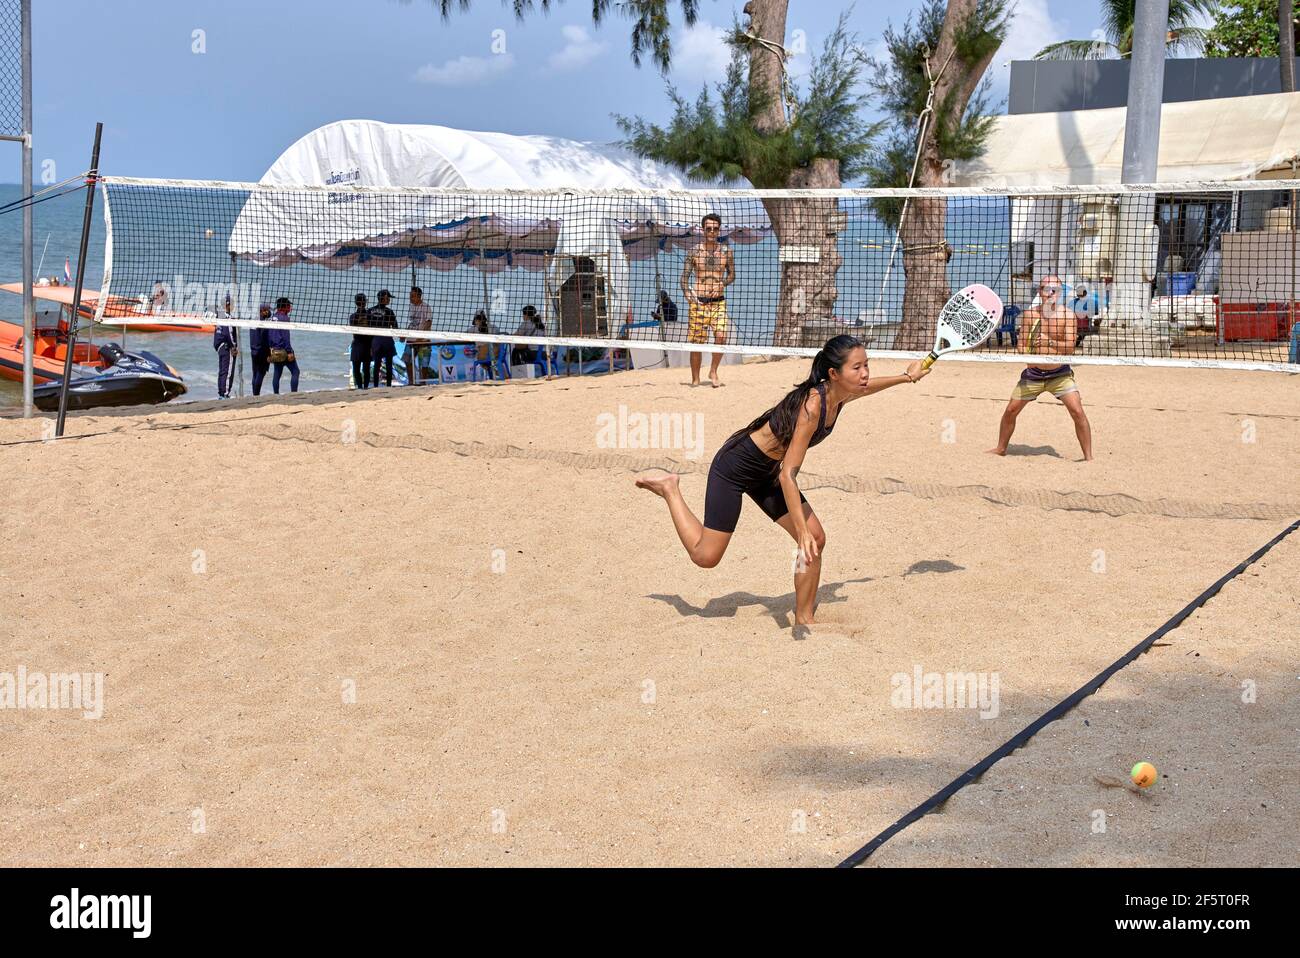 Beach tennis with woman competitor Stock Photo